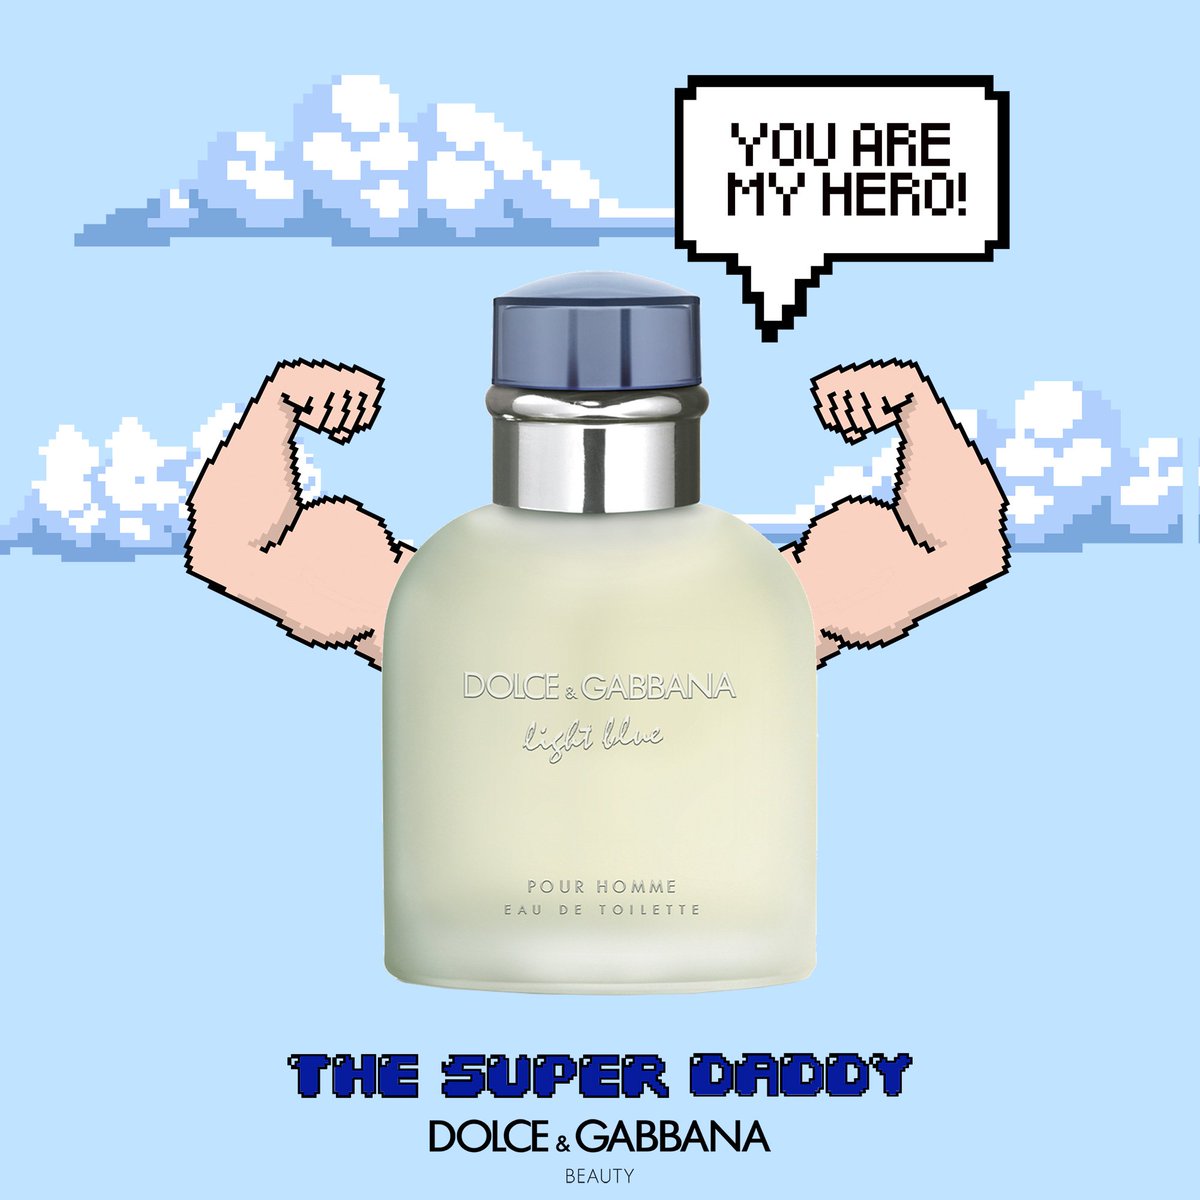 fathers day aftershave